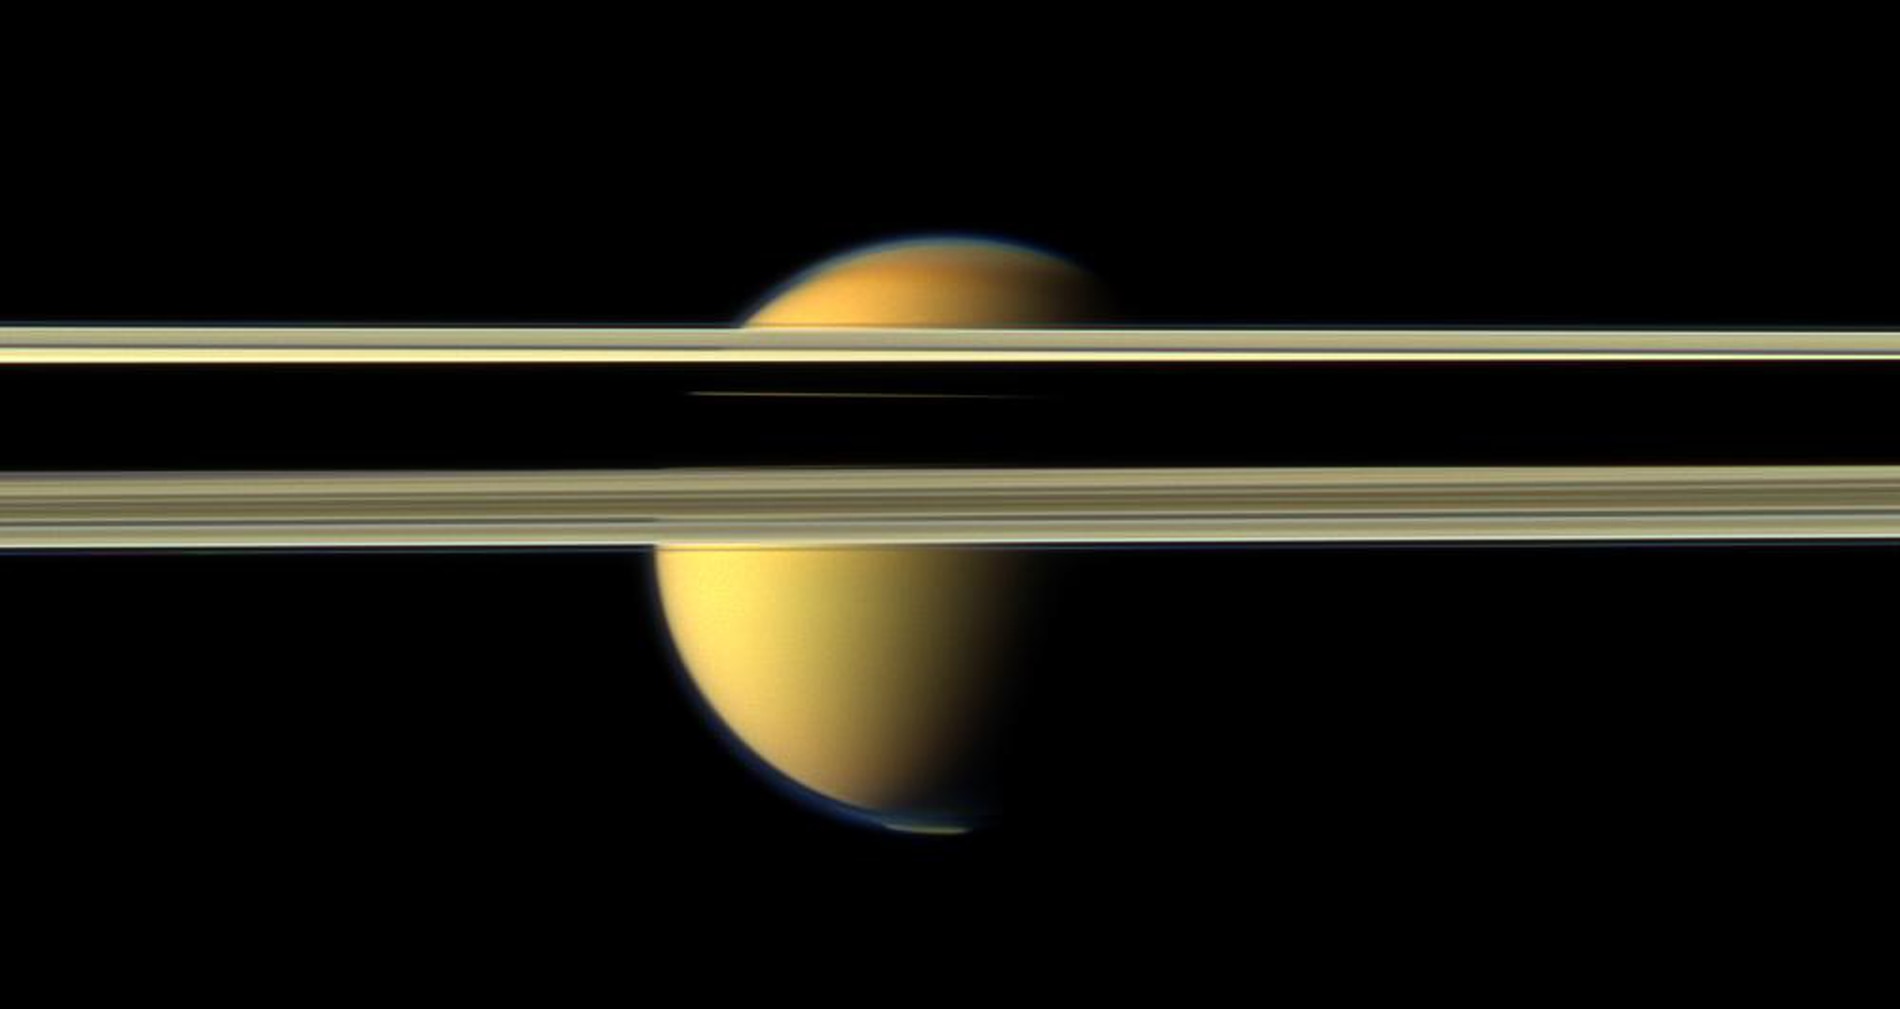 Titan tries to hide behind Saturn’s rings in this image from 2012. Note the visible bluish haze layer in Titan’s upper atmosphere. Credit: NASA/JPL-Caltech/SSI